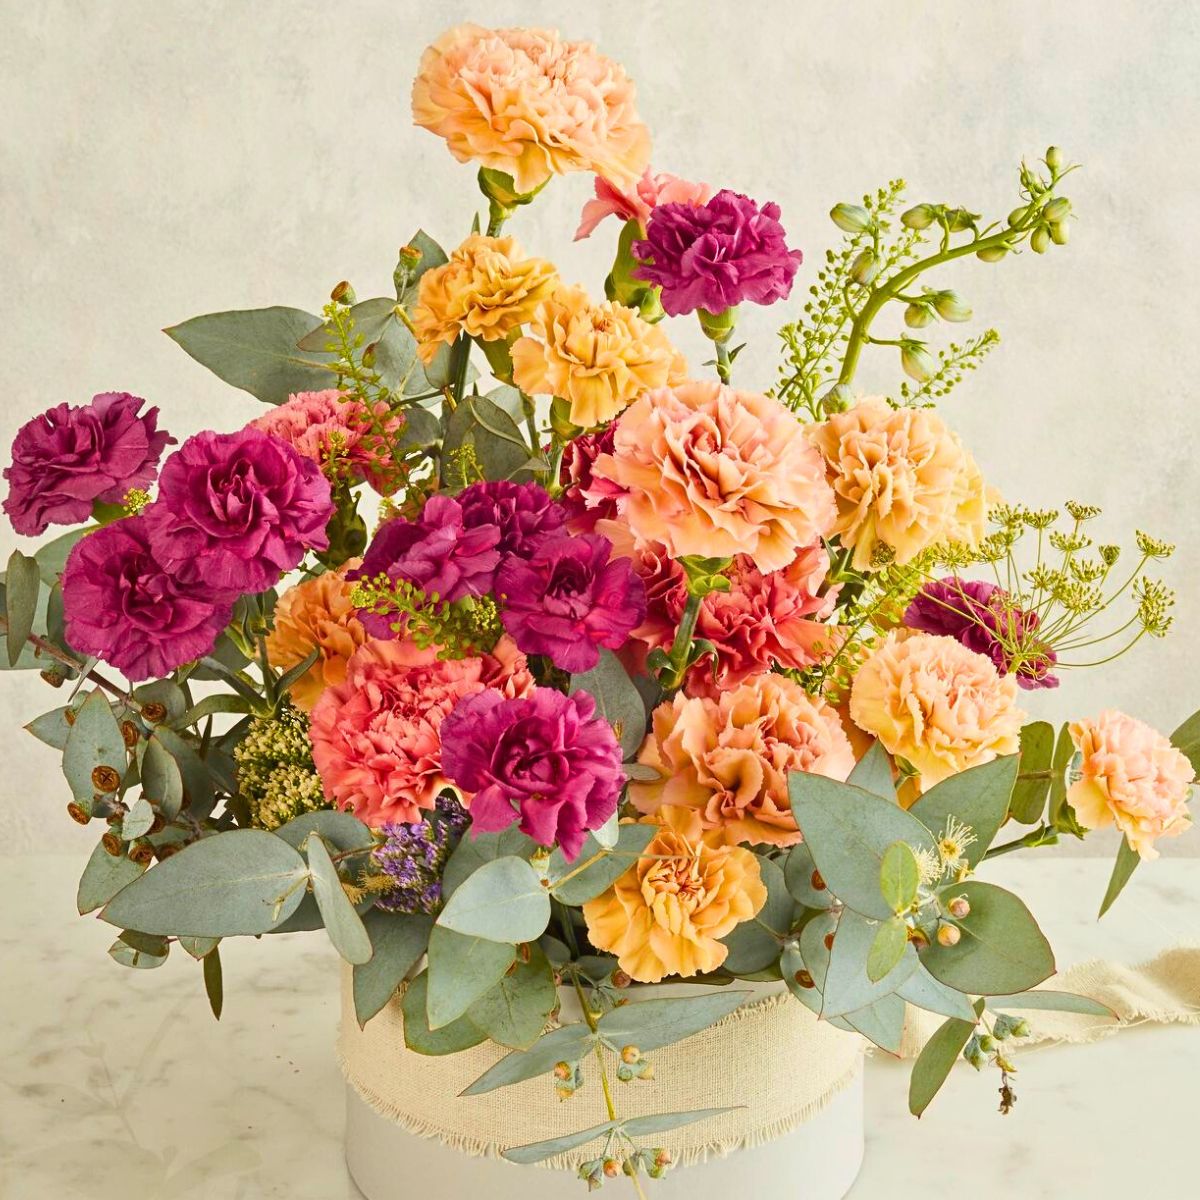 What Are the Best Flowers to Gift This Father’s Day?